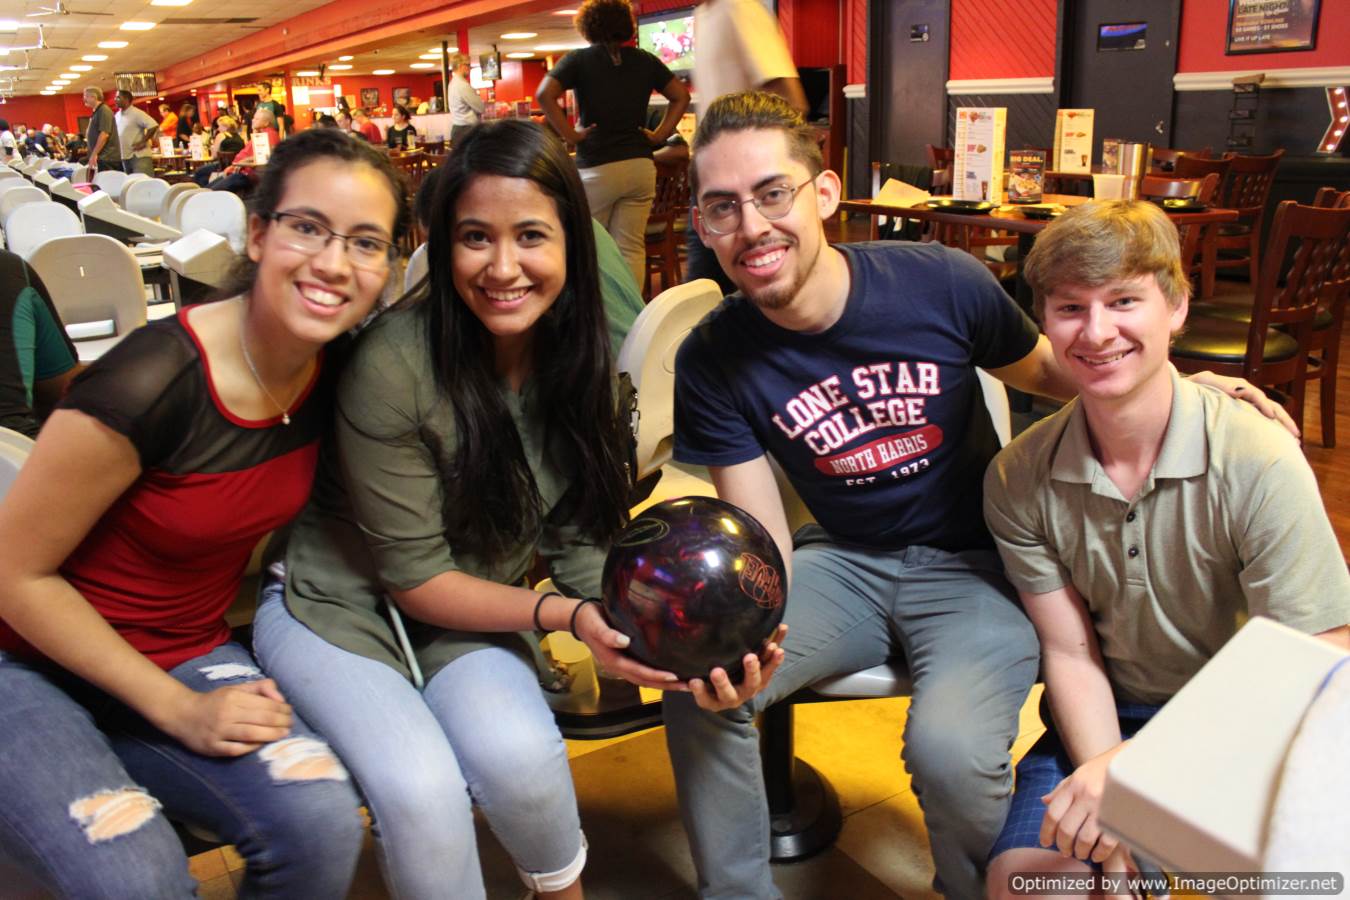 Photo of students at a bowling tournament posing for photo